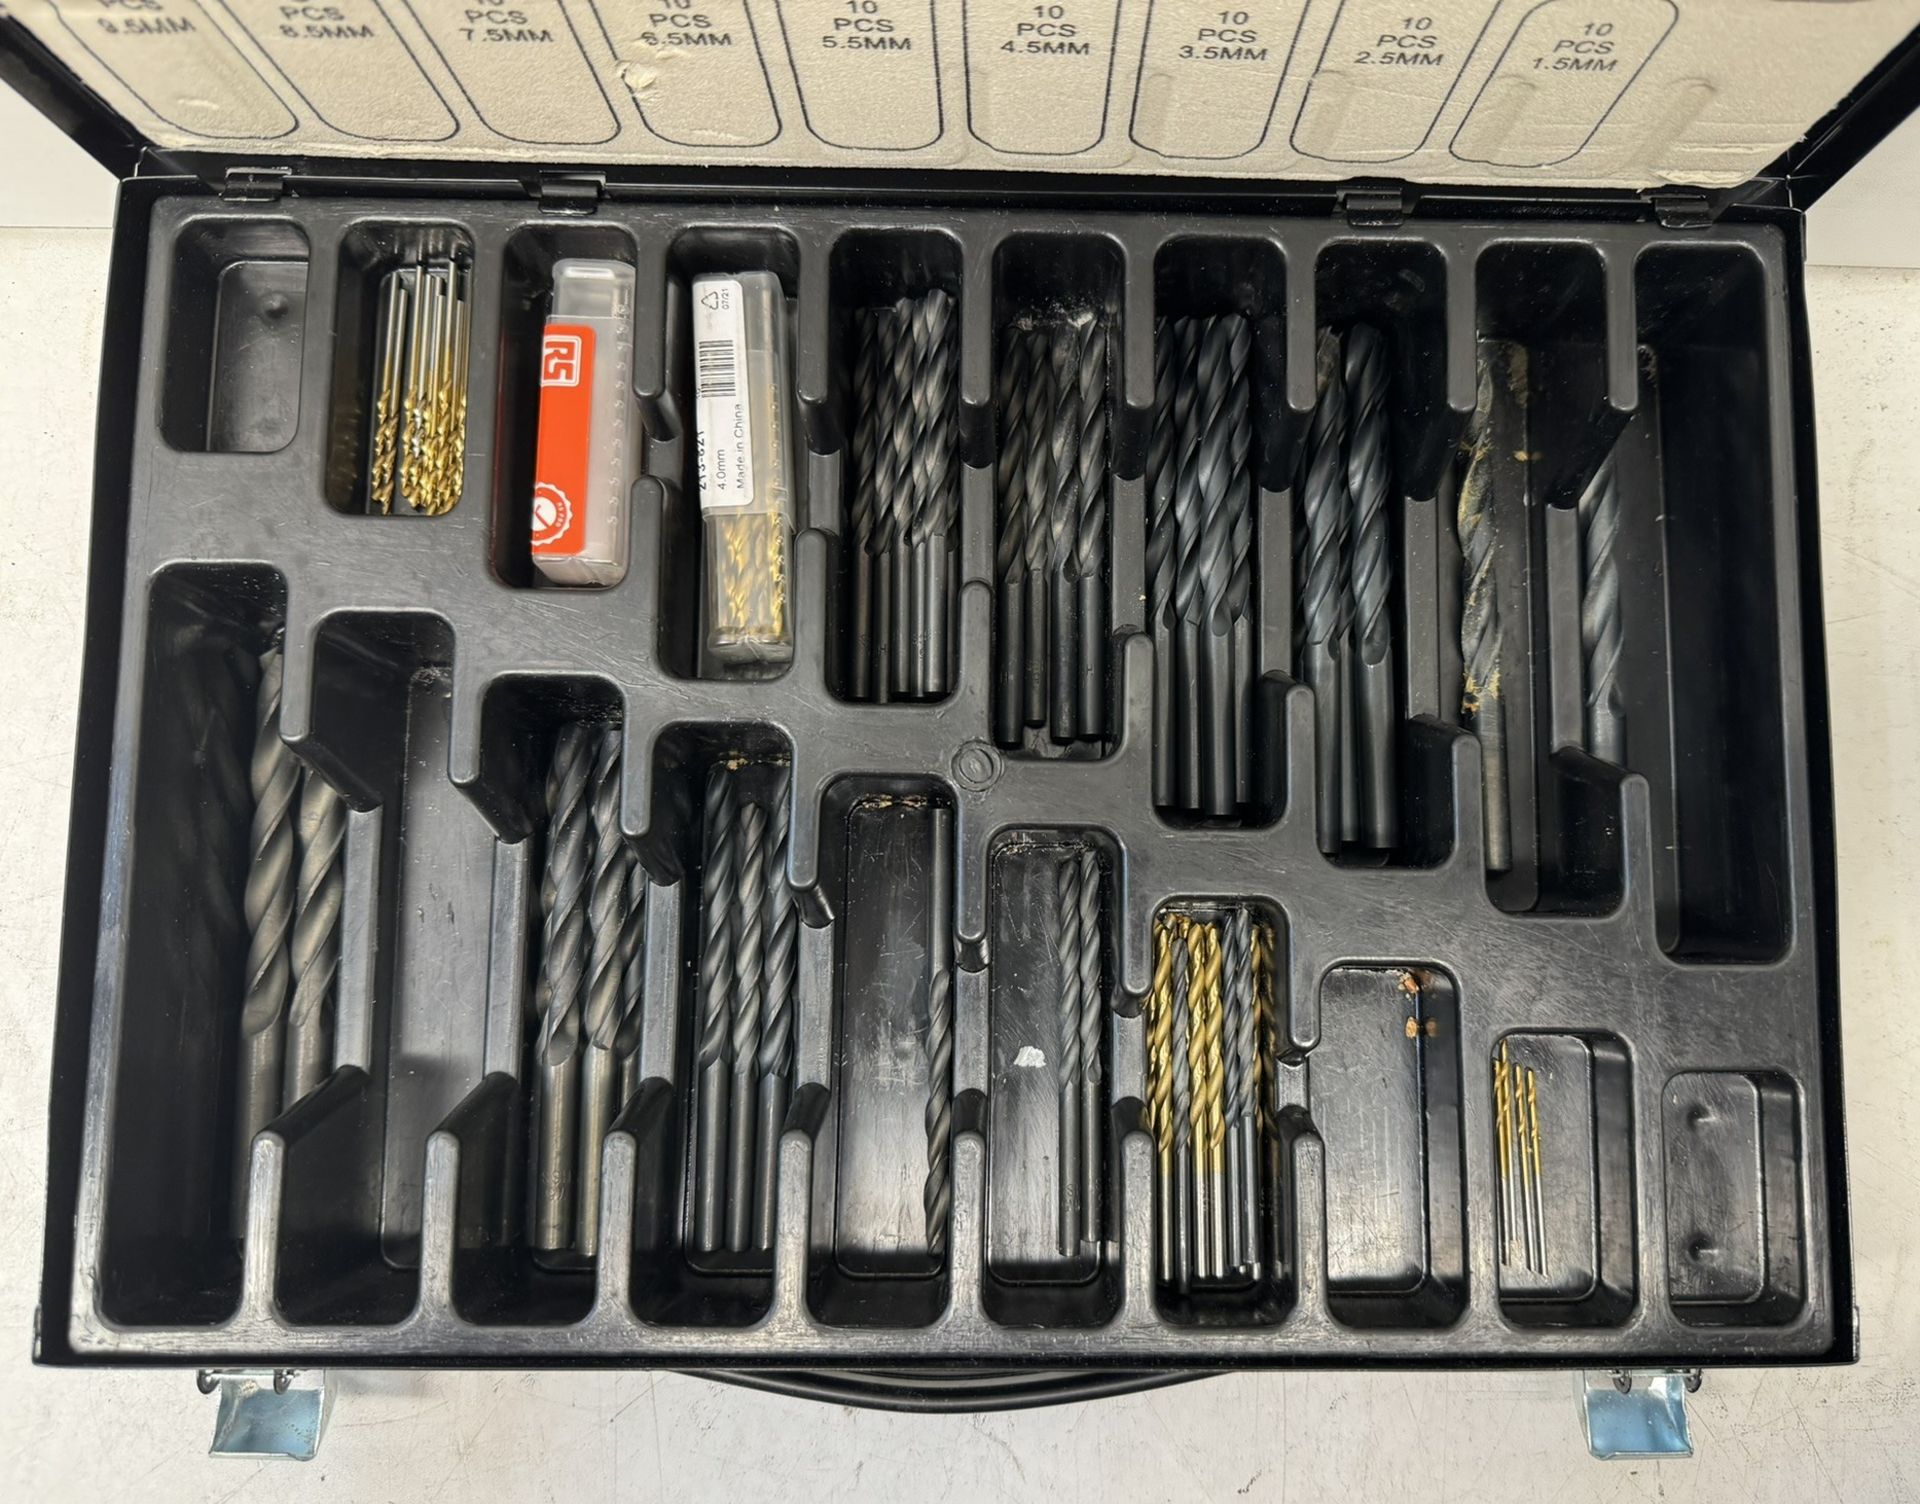 2 x Incomplete Drill Bit Sets With Case As Seen In Photos - Image 4 of 5